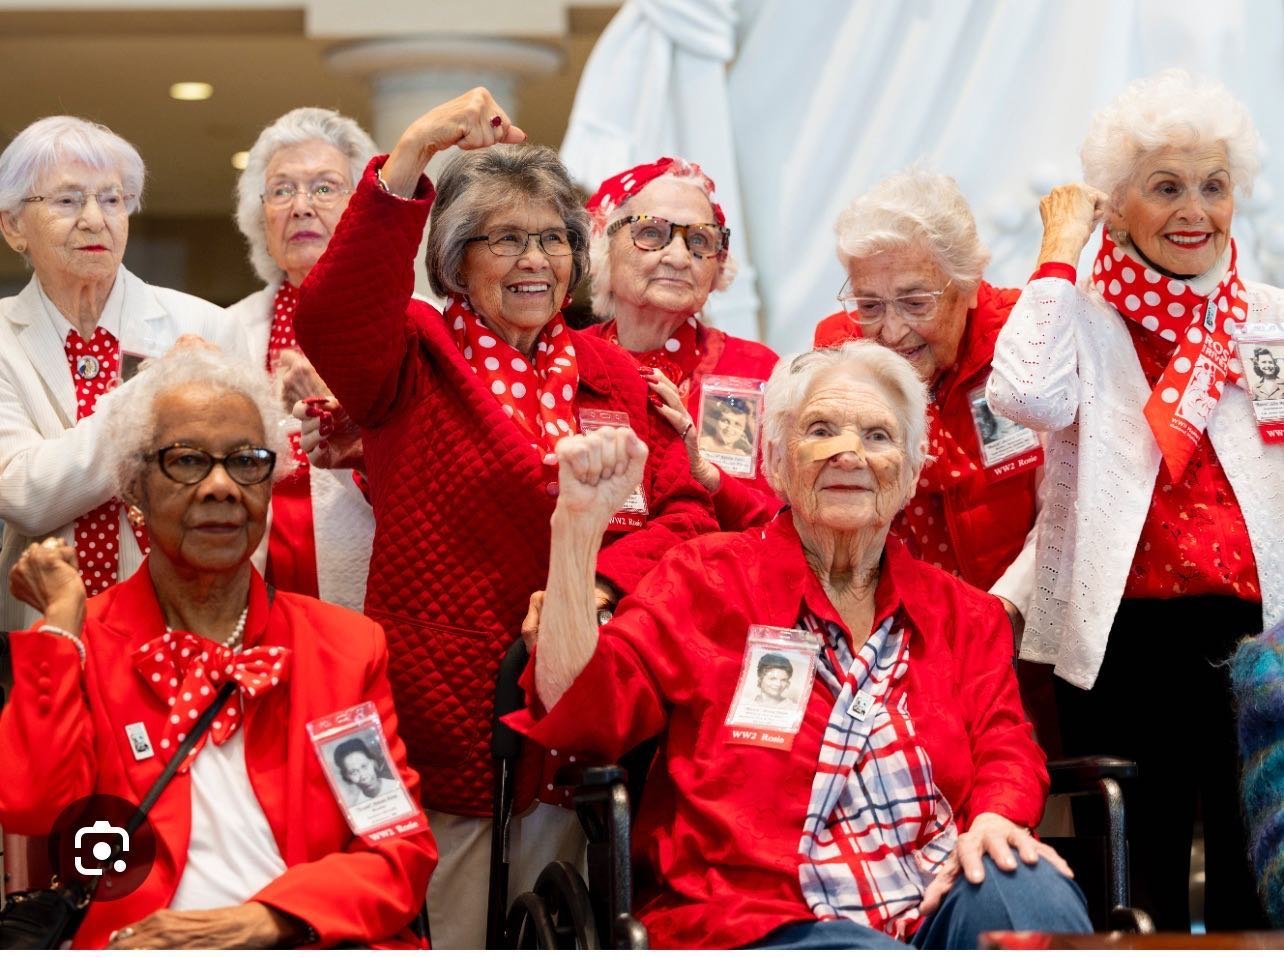 I bet if the &ldquo;Rosie, the Riveter&rdquo; ladies ran Boeing, none of the doors, windows or other parts would have ever fallen off! Thank you so much ladies for your service, and congratulations for finally being awarded the Congressional Medal of